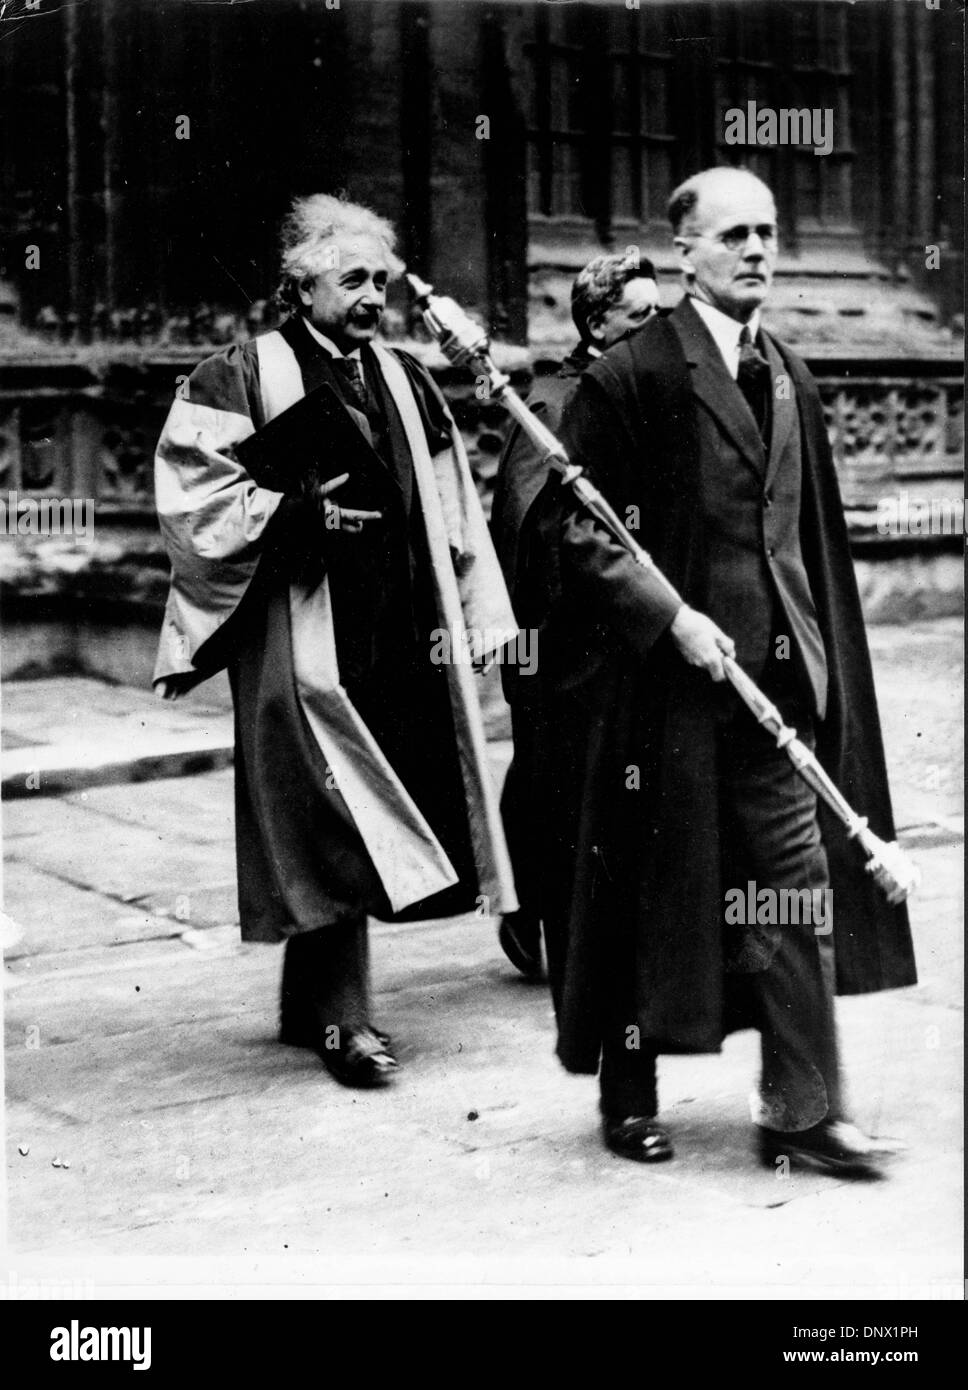 May 26, 1931 - London, England, U.K. - Professor ALBERT EINSTEIN visiting the University of Oxford. Einstein (March 14, 1879 Ð April 18, 1955) was a German theoretical physicist regarded as the greatest scientist of the 20th century. He proposed the theory of relativity and made contributions to the development of quantum mechanics, statistical mechanics, and cosmology. (Credit Ima Stock Photo